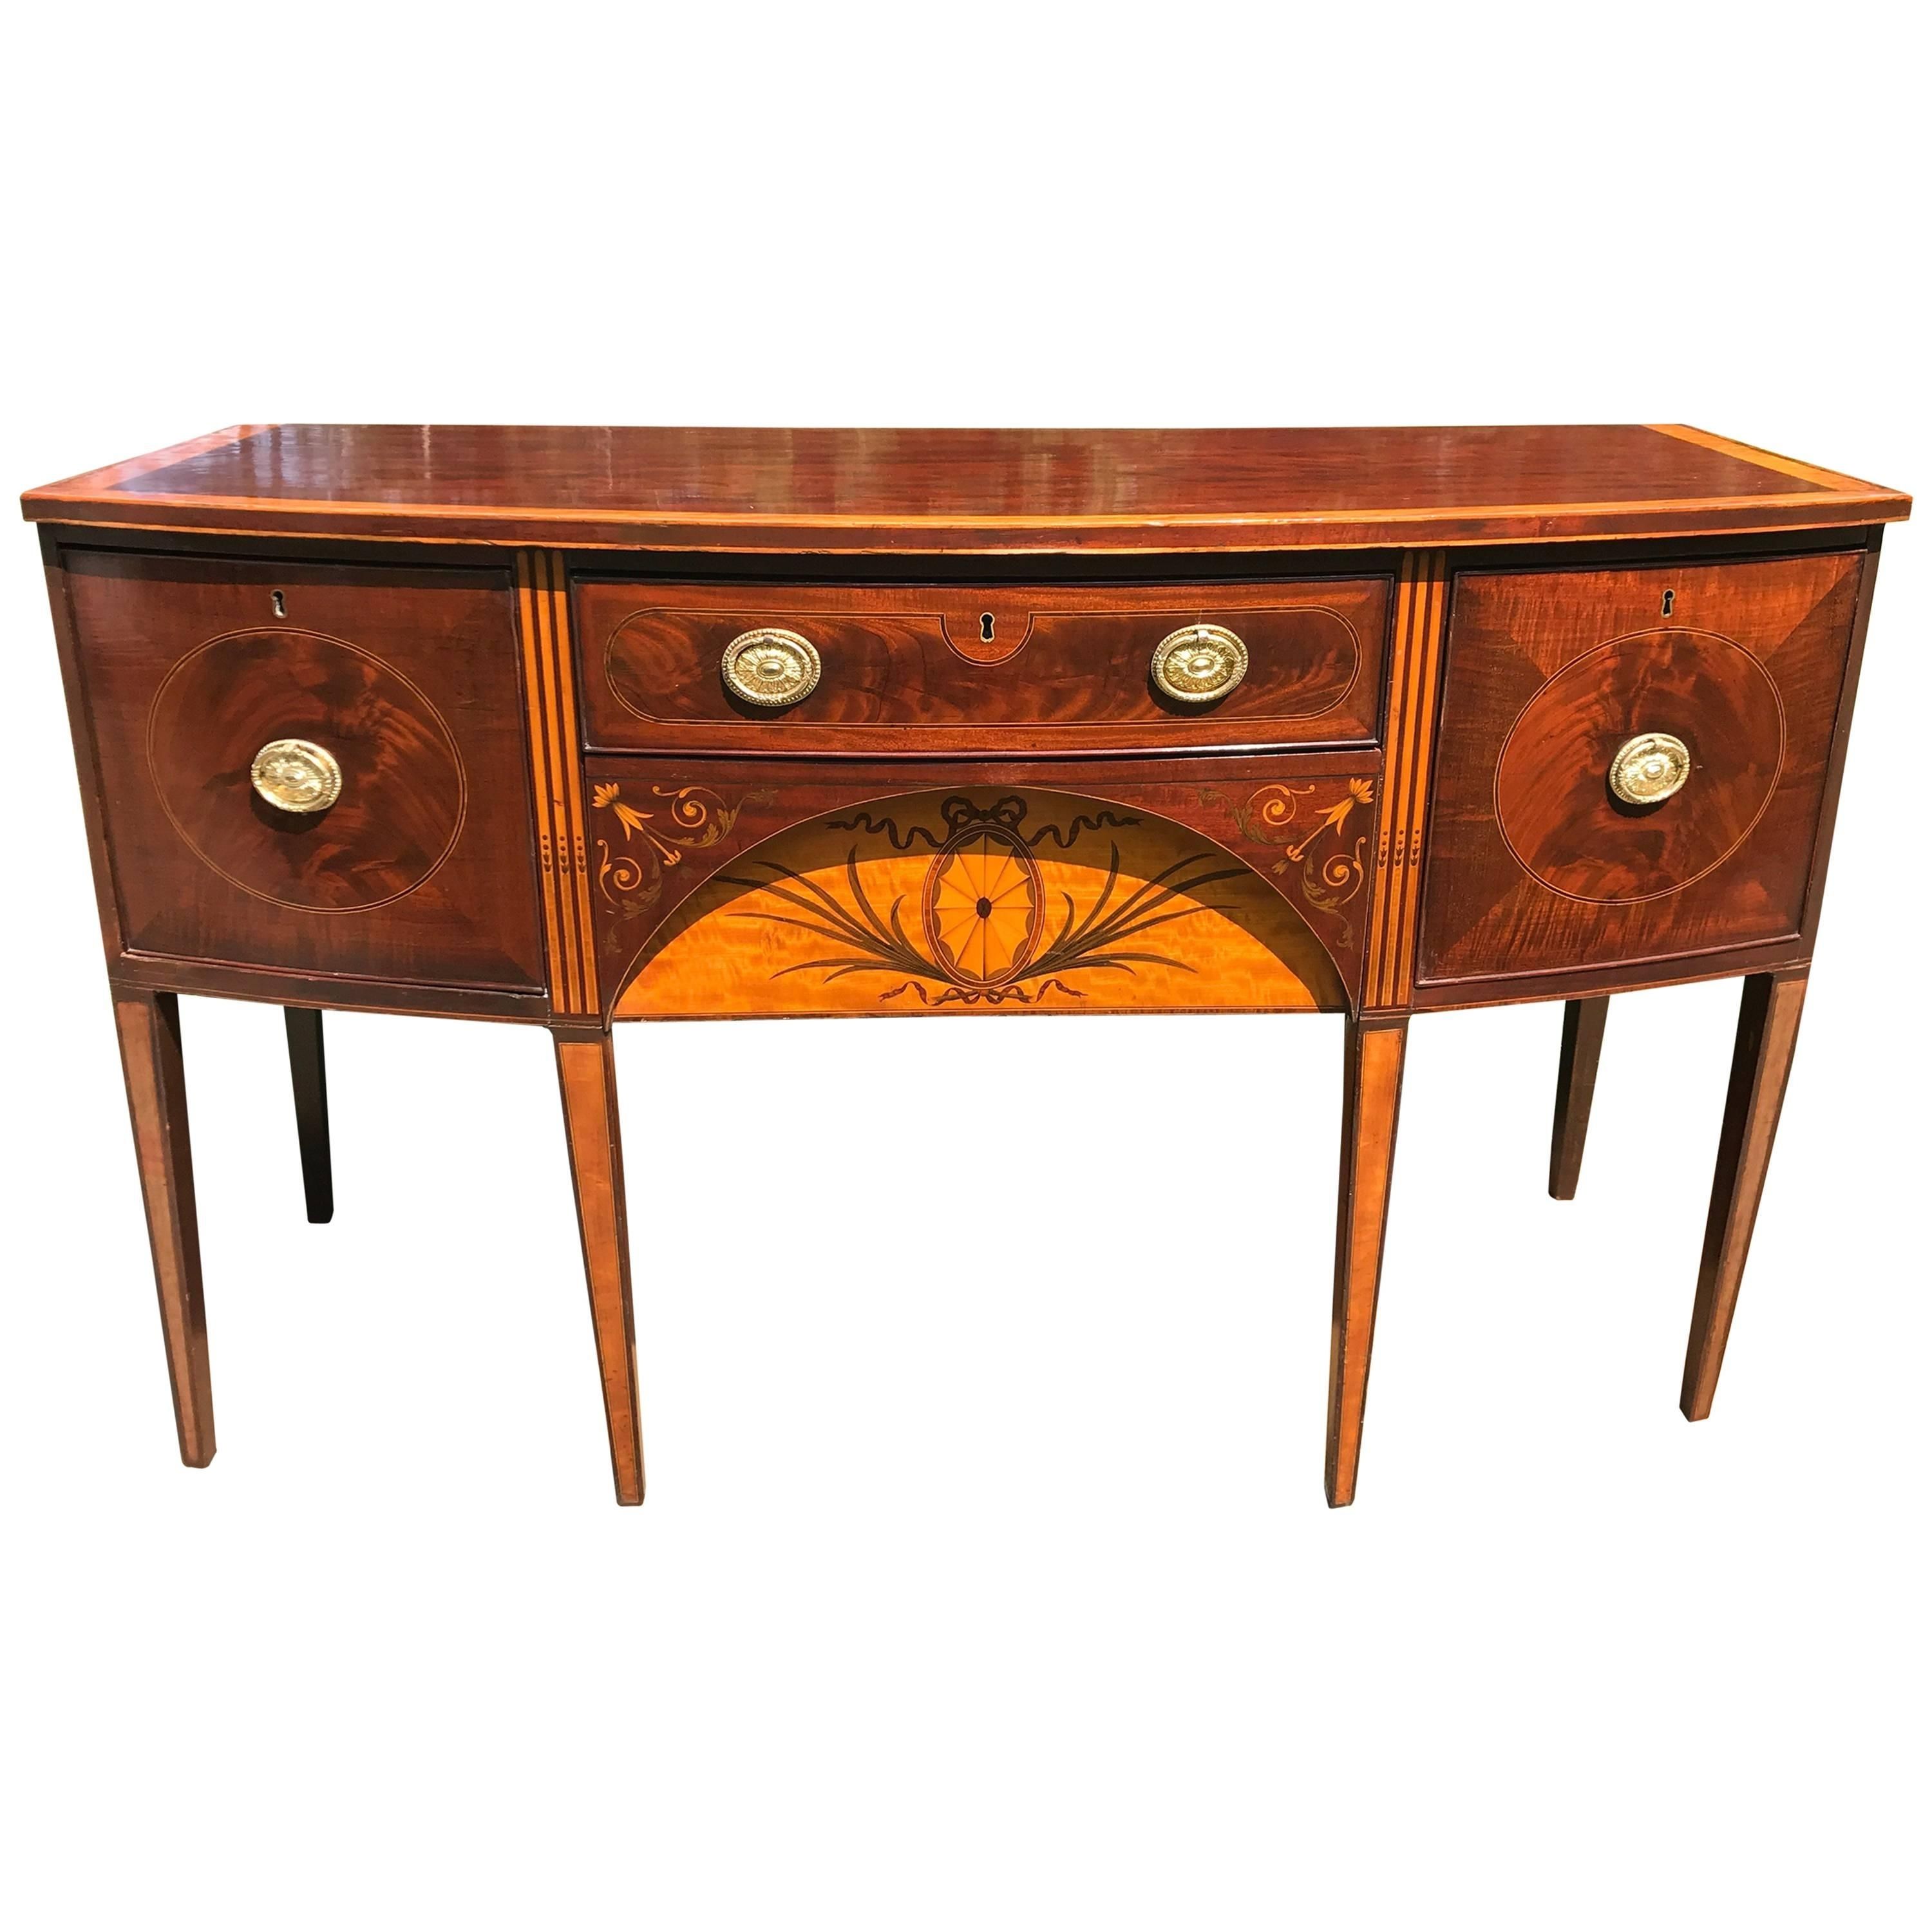 Federal Sideboards – 29 For Sale At 1stdibs For Diamond Circle Sideboards (View 29 of 30)